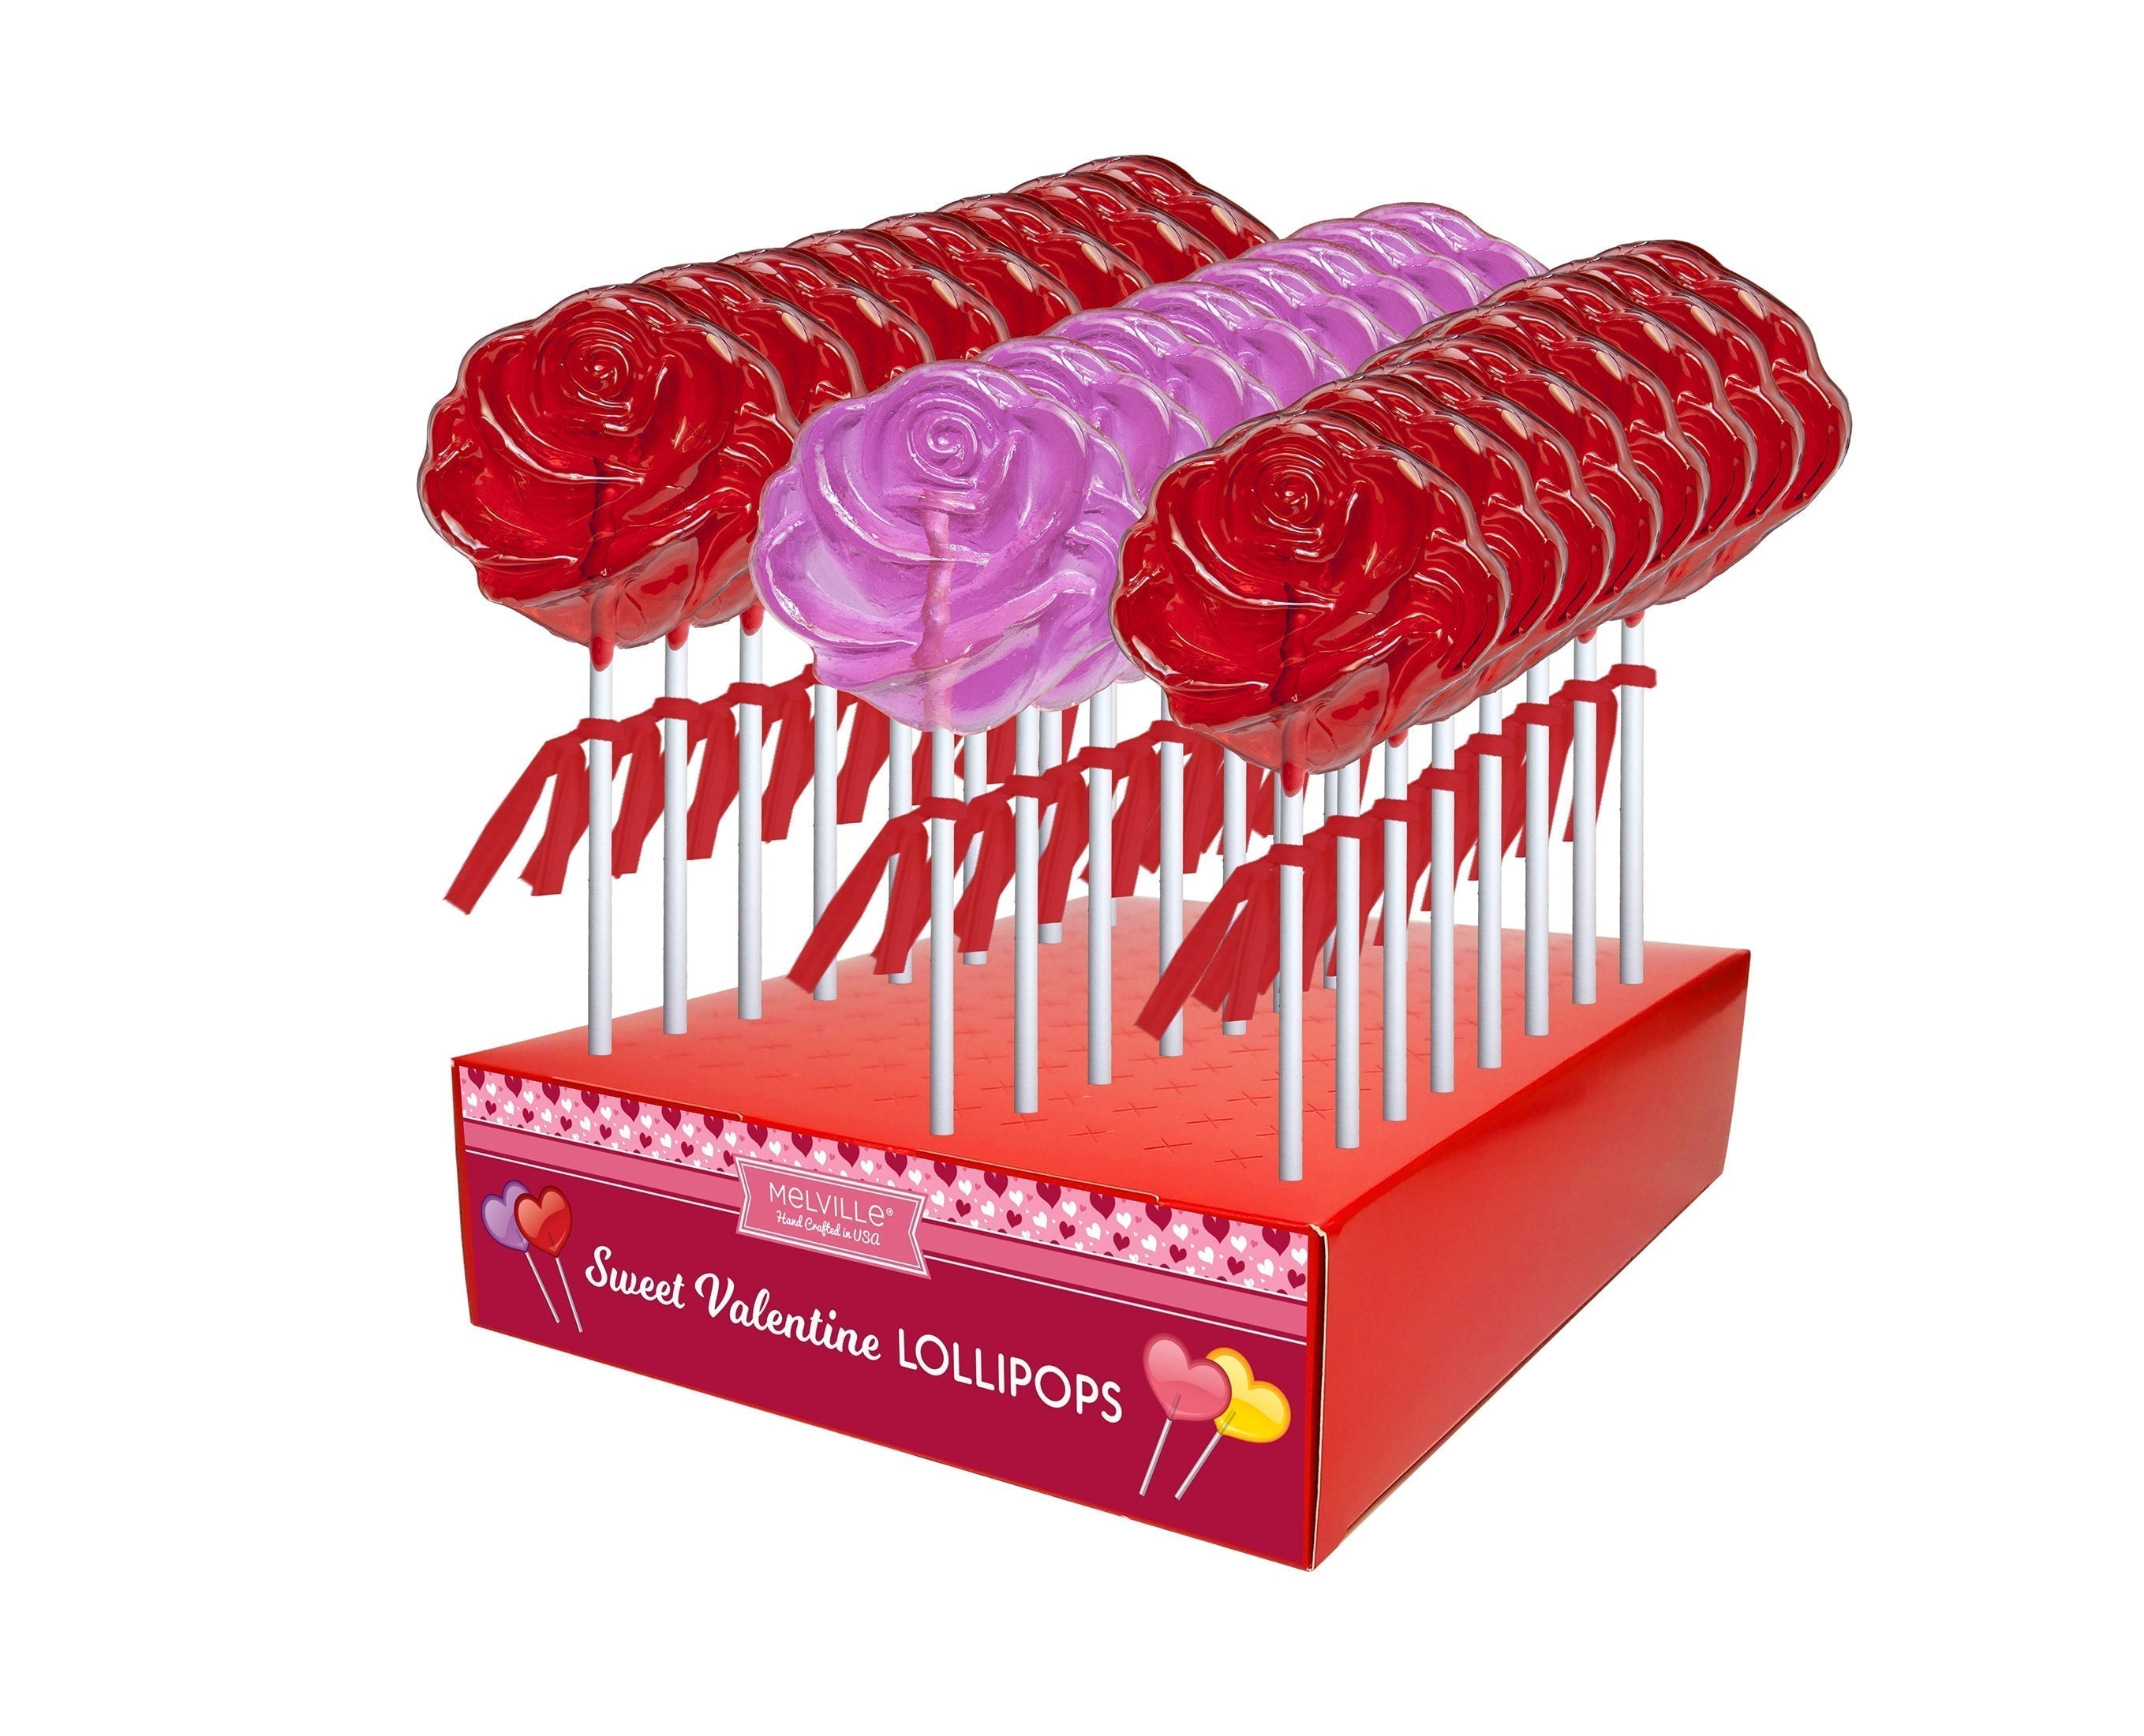 Red And Pink Rose Lollipops by Melville Candy Company